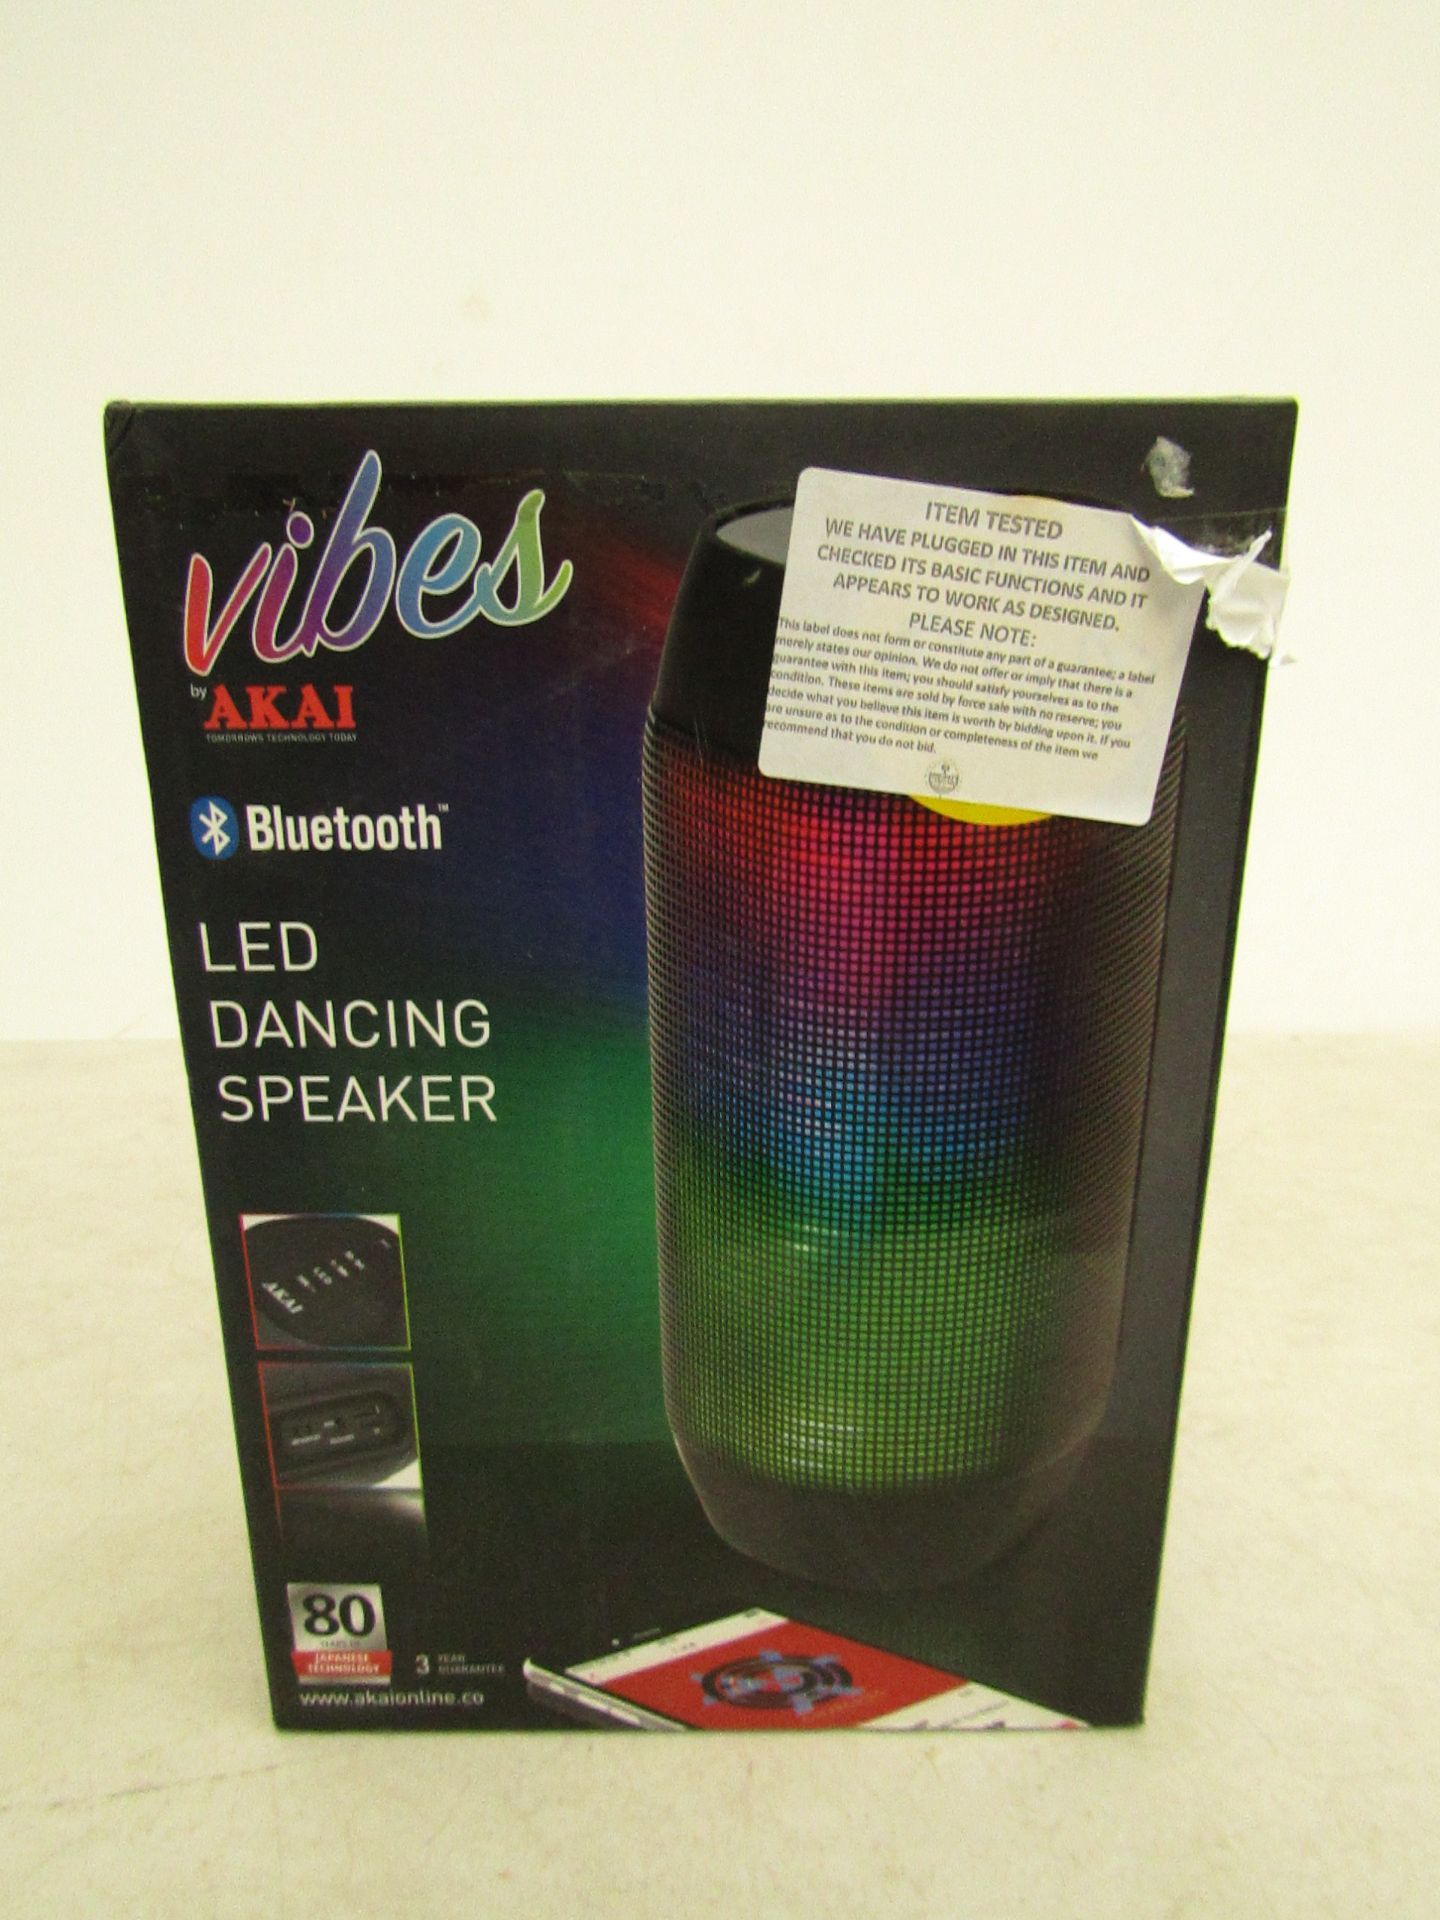 Vibes Akai Bluetooth LED dancing speaker, tested working and boxed.